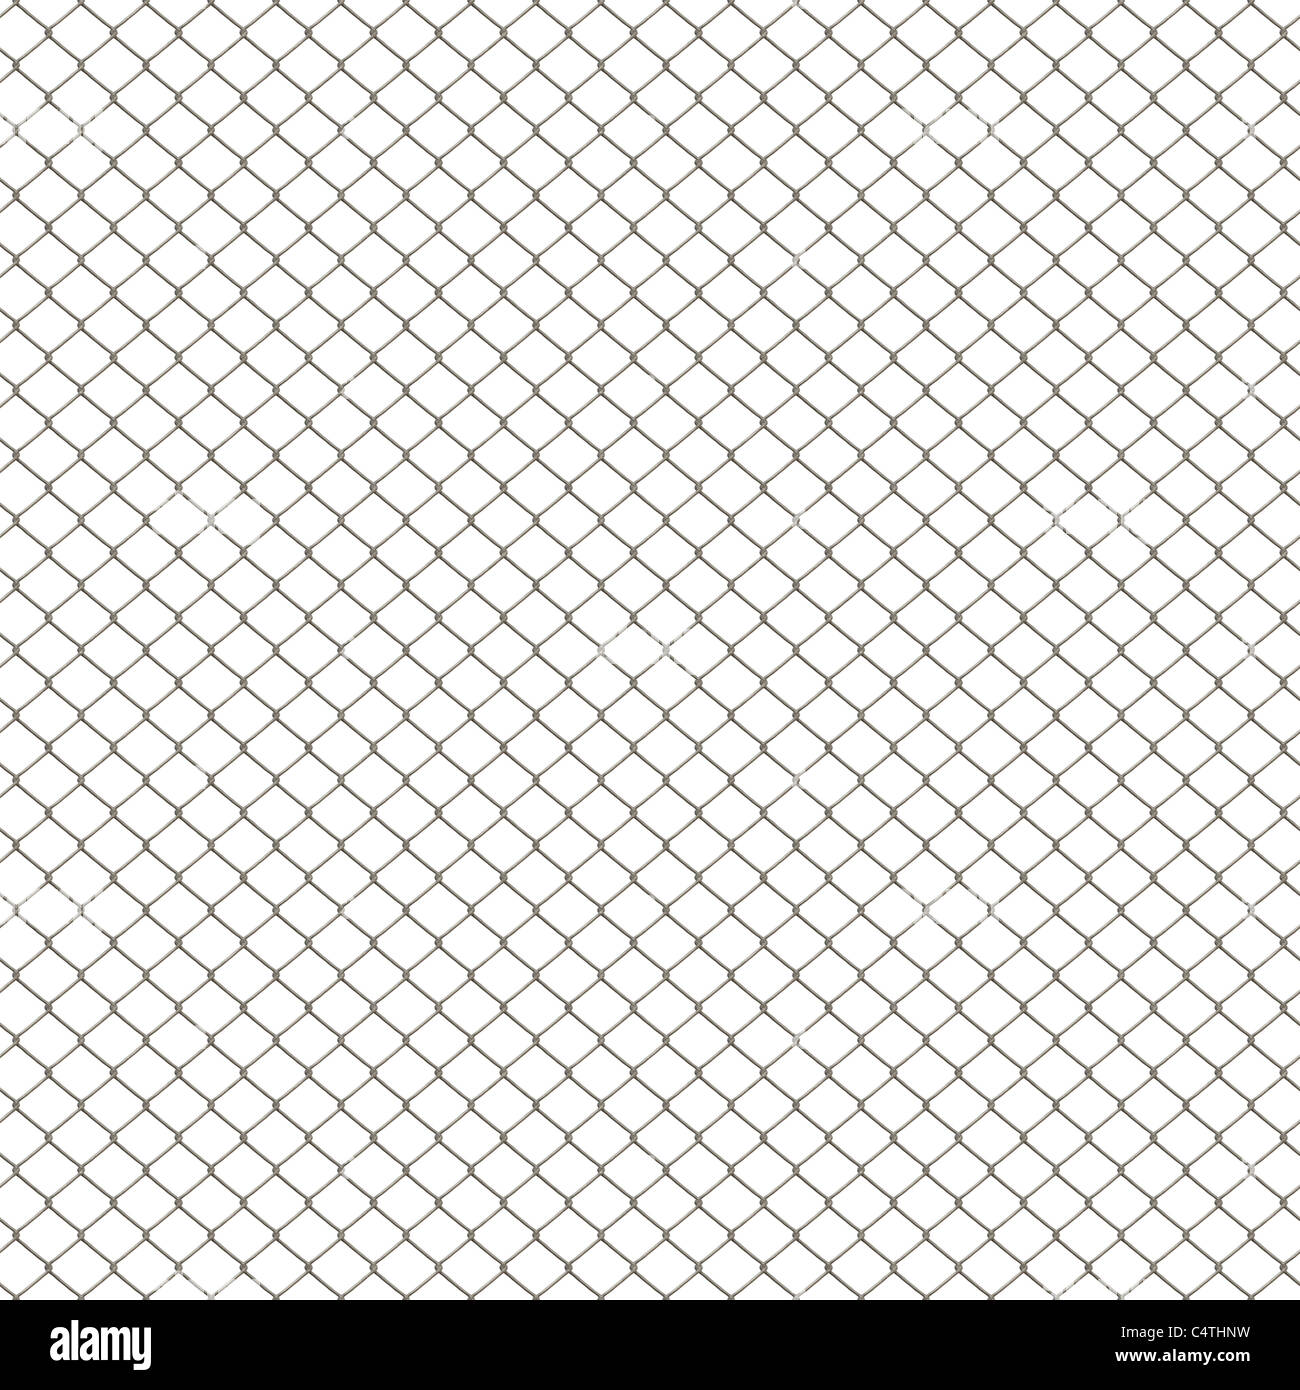 A 3D chain link fence texture over black - this tiles seamlessly as a pattern in any direction. Stock Photo